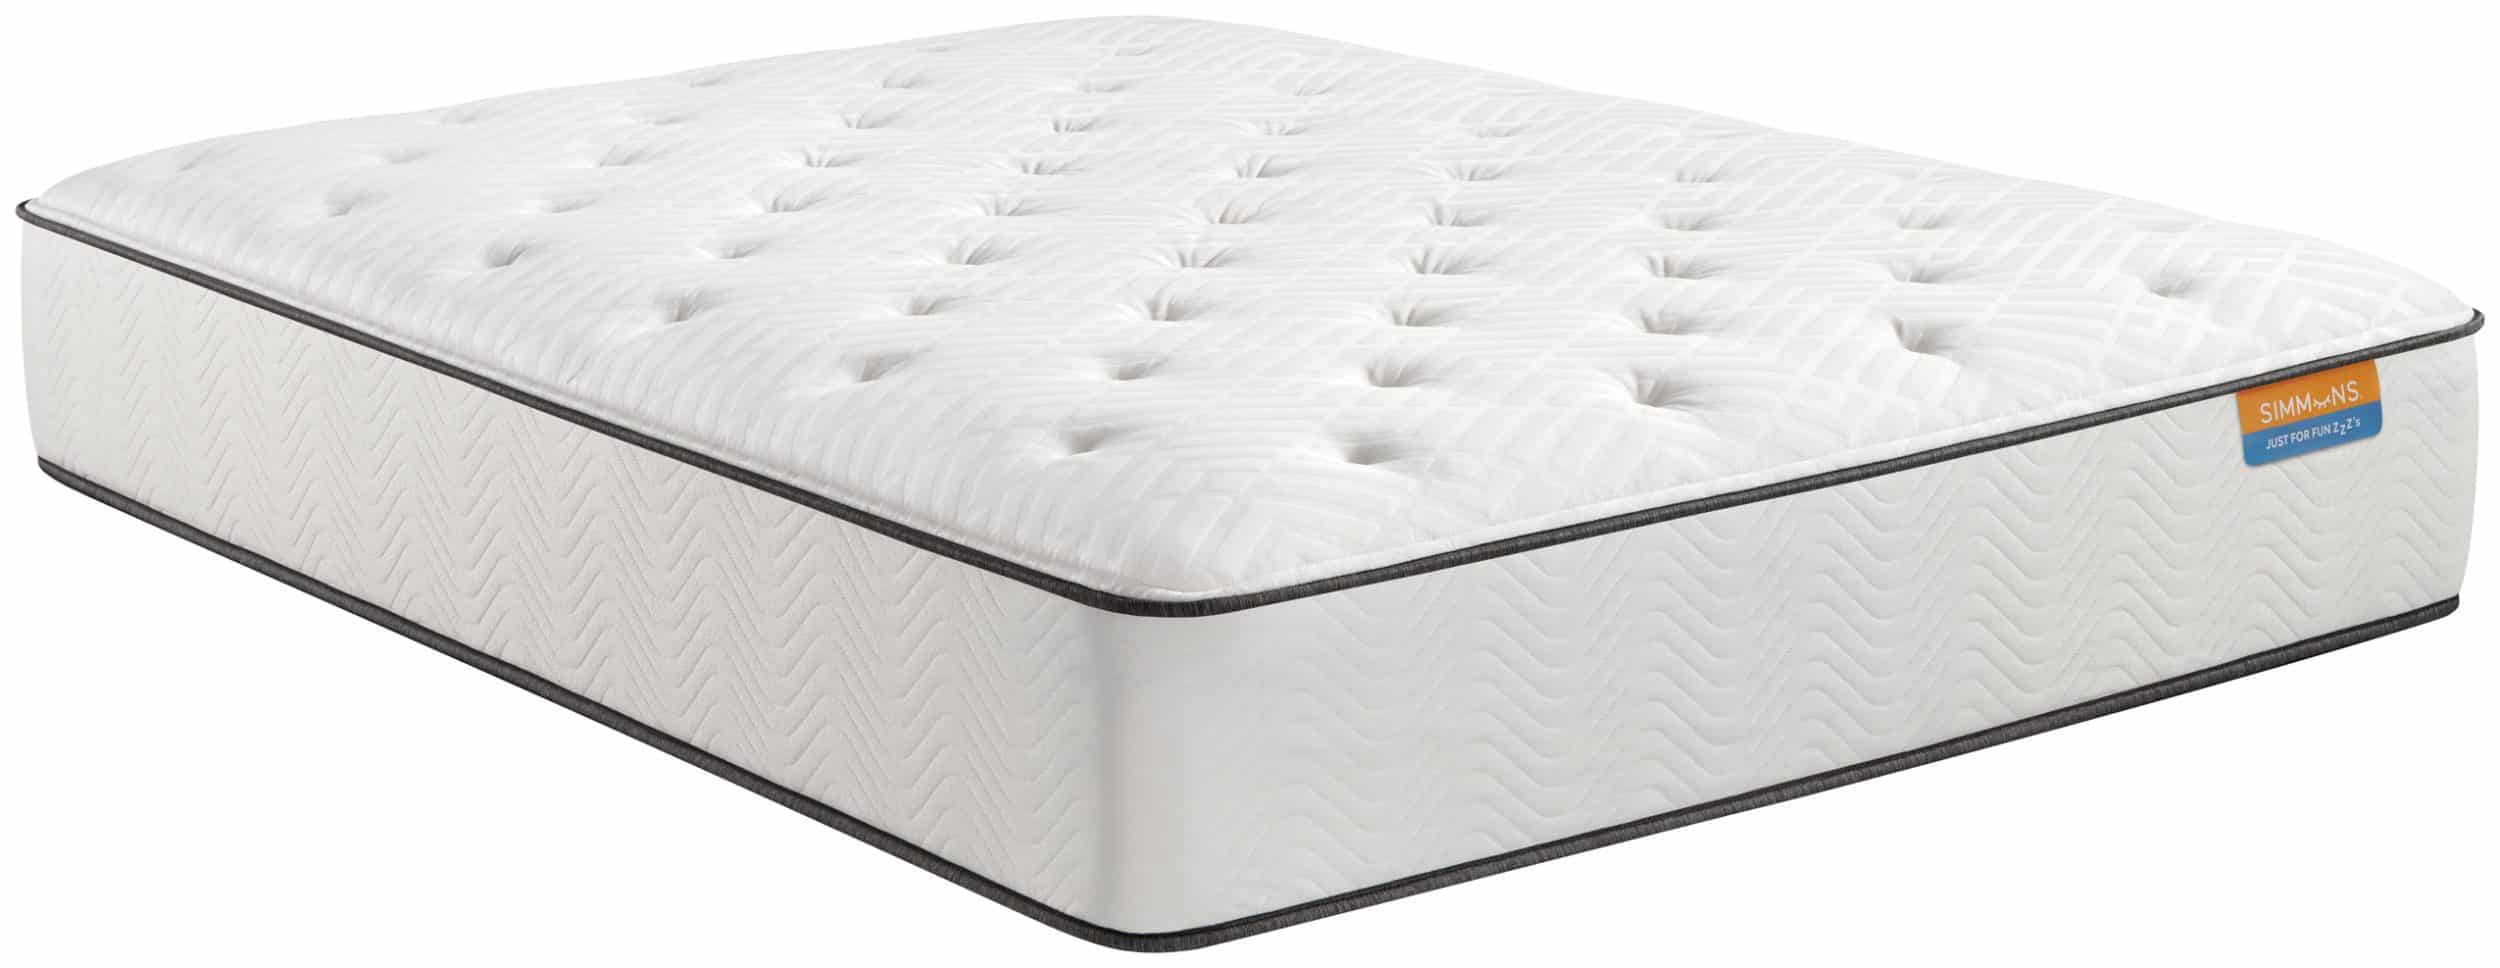 Side corner perspective of a Simmons Vacay slim mattress